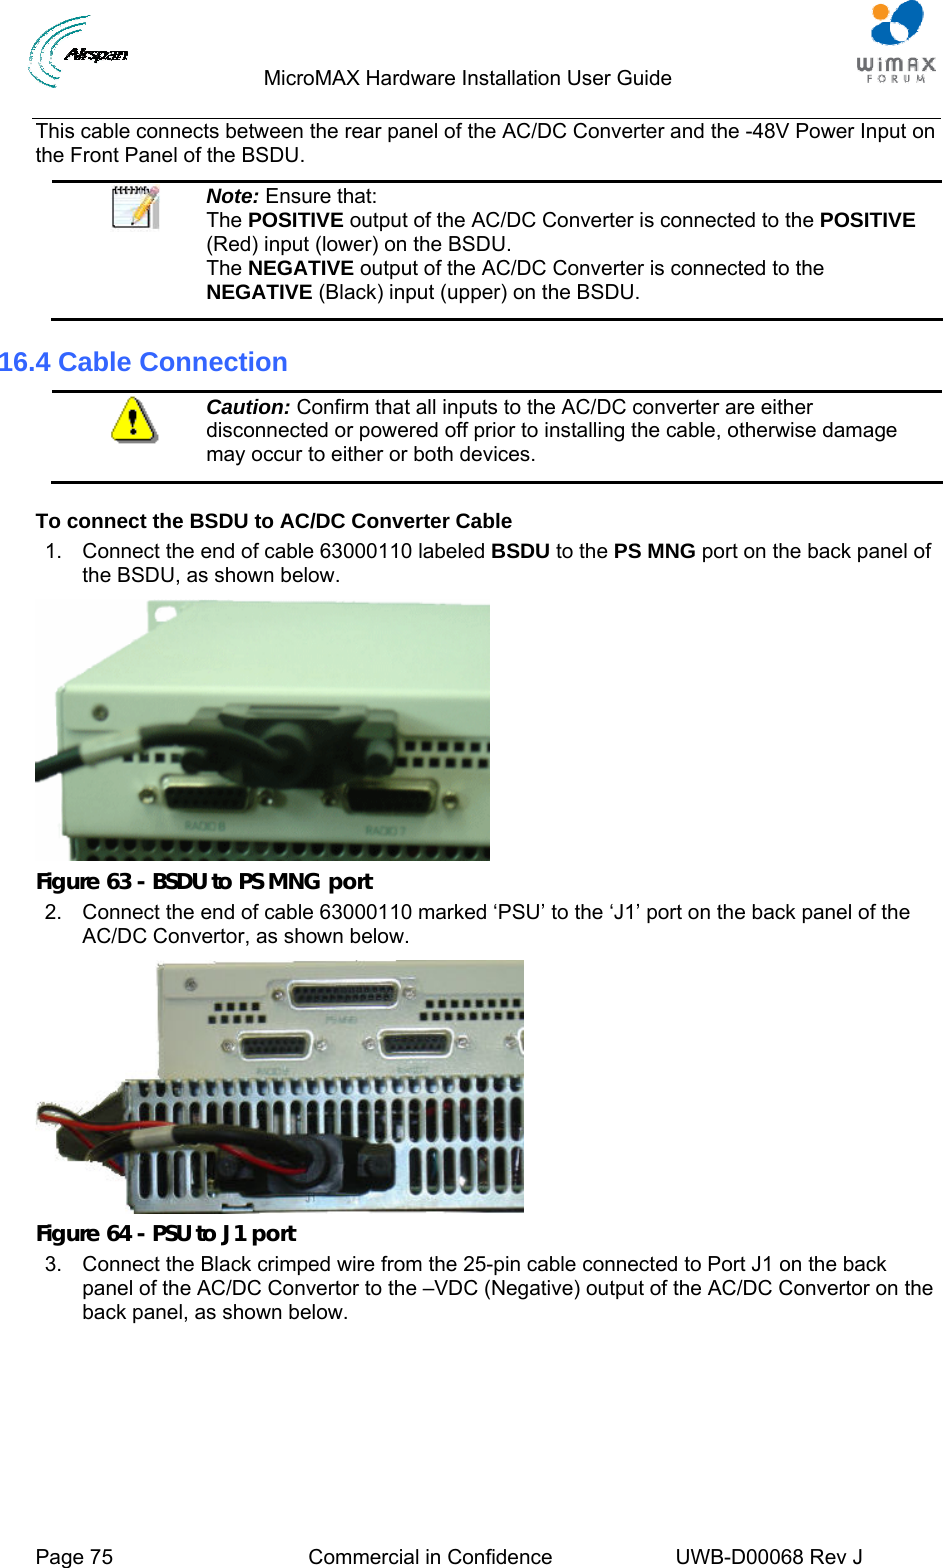                                  MicroMAX Hardware Installation User Guide     Page 75  Commercial in Confidence  UWB-D00068 Rev J   This cable connects between the rear panel of the AC/DC Converter and the -48V Power Input on the Front Panel of the BSDU.  Note: Ensure that:  The POSITIVE output of the AC/DC Converter is connected to the POSITIVE (Red) input (lower) on the BSDU. The NEGATIVE output of the AC/DC Converter is connected to the NEGATIVE (Black) input (upper) on the BSDU. 16.4 Cable Connection  Caution: Confirm that all inputs to the AC/DC converter are either disconnected or powered off prior to installing the cable, otherwise damage may occur to either or both devices.  To connect the BSDU to AC/DC Converter Cable 1.  Connect the end of cable 63000110 labeled BSDU to the PS MNG port on the back panel of the BSDU, as shown below.  Figure 63 - BSDU to PS MNG port 2.  Connect the end of cable 63000110 marked ‘PSU’ to the ‘J1’ port on the back panel of the AC/DC Convertor, as shown below.  Figure 64 - PSU to J1 port 3.  Connect the Black crimped wire from the 25-pin cable connected to Port J1 on the back panel of the AC/DC Convertor to the –VDC (Negative) output of the AC/DC Convertor on the back panel, as shown below. 